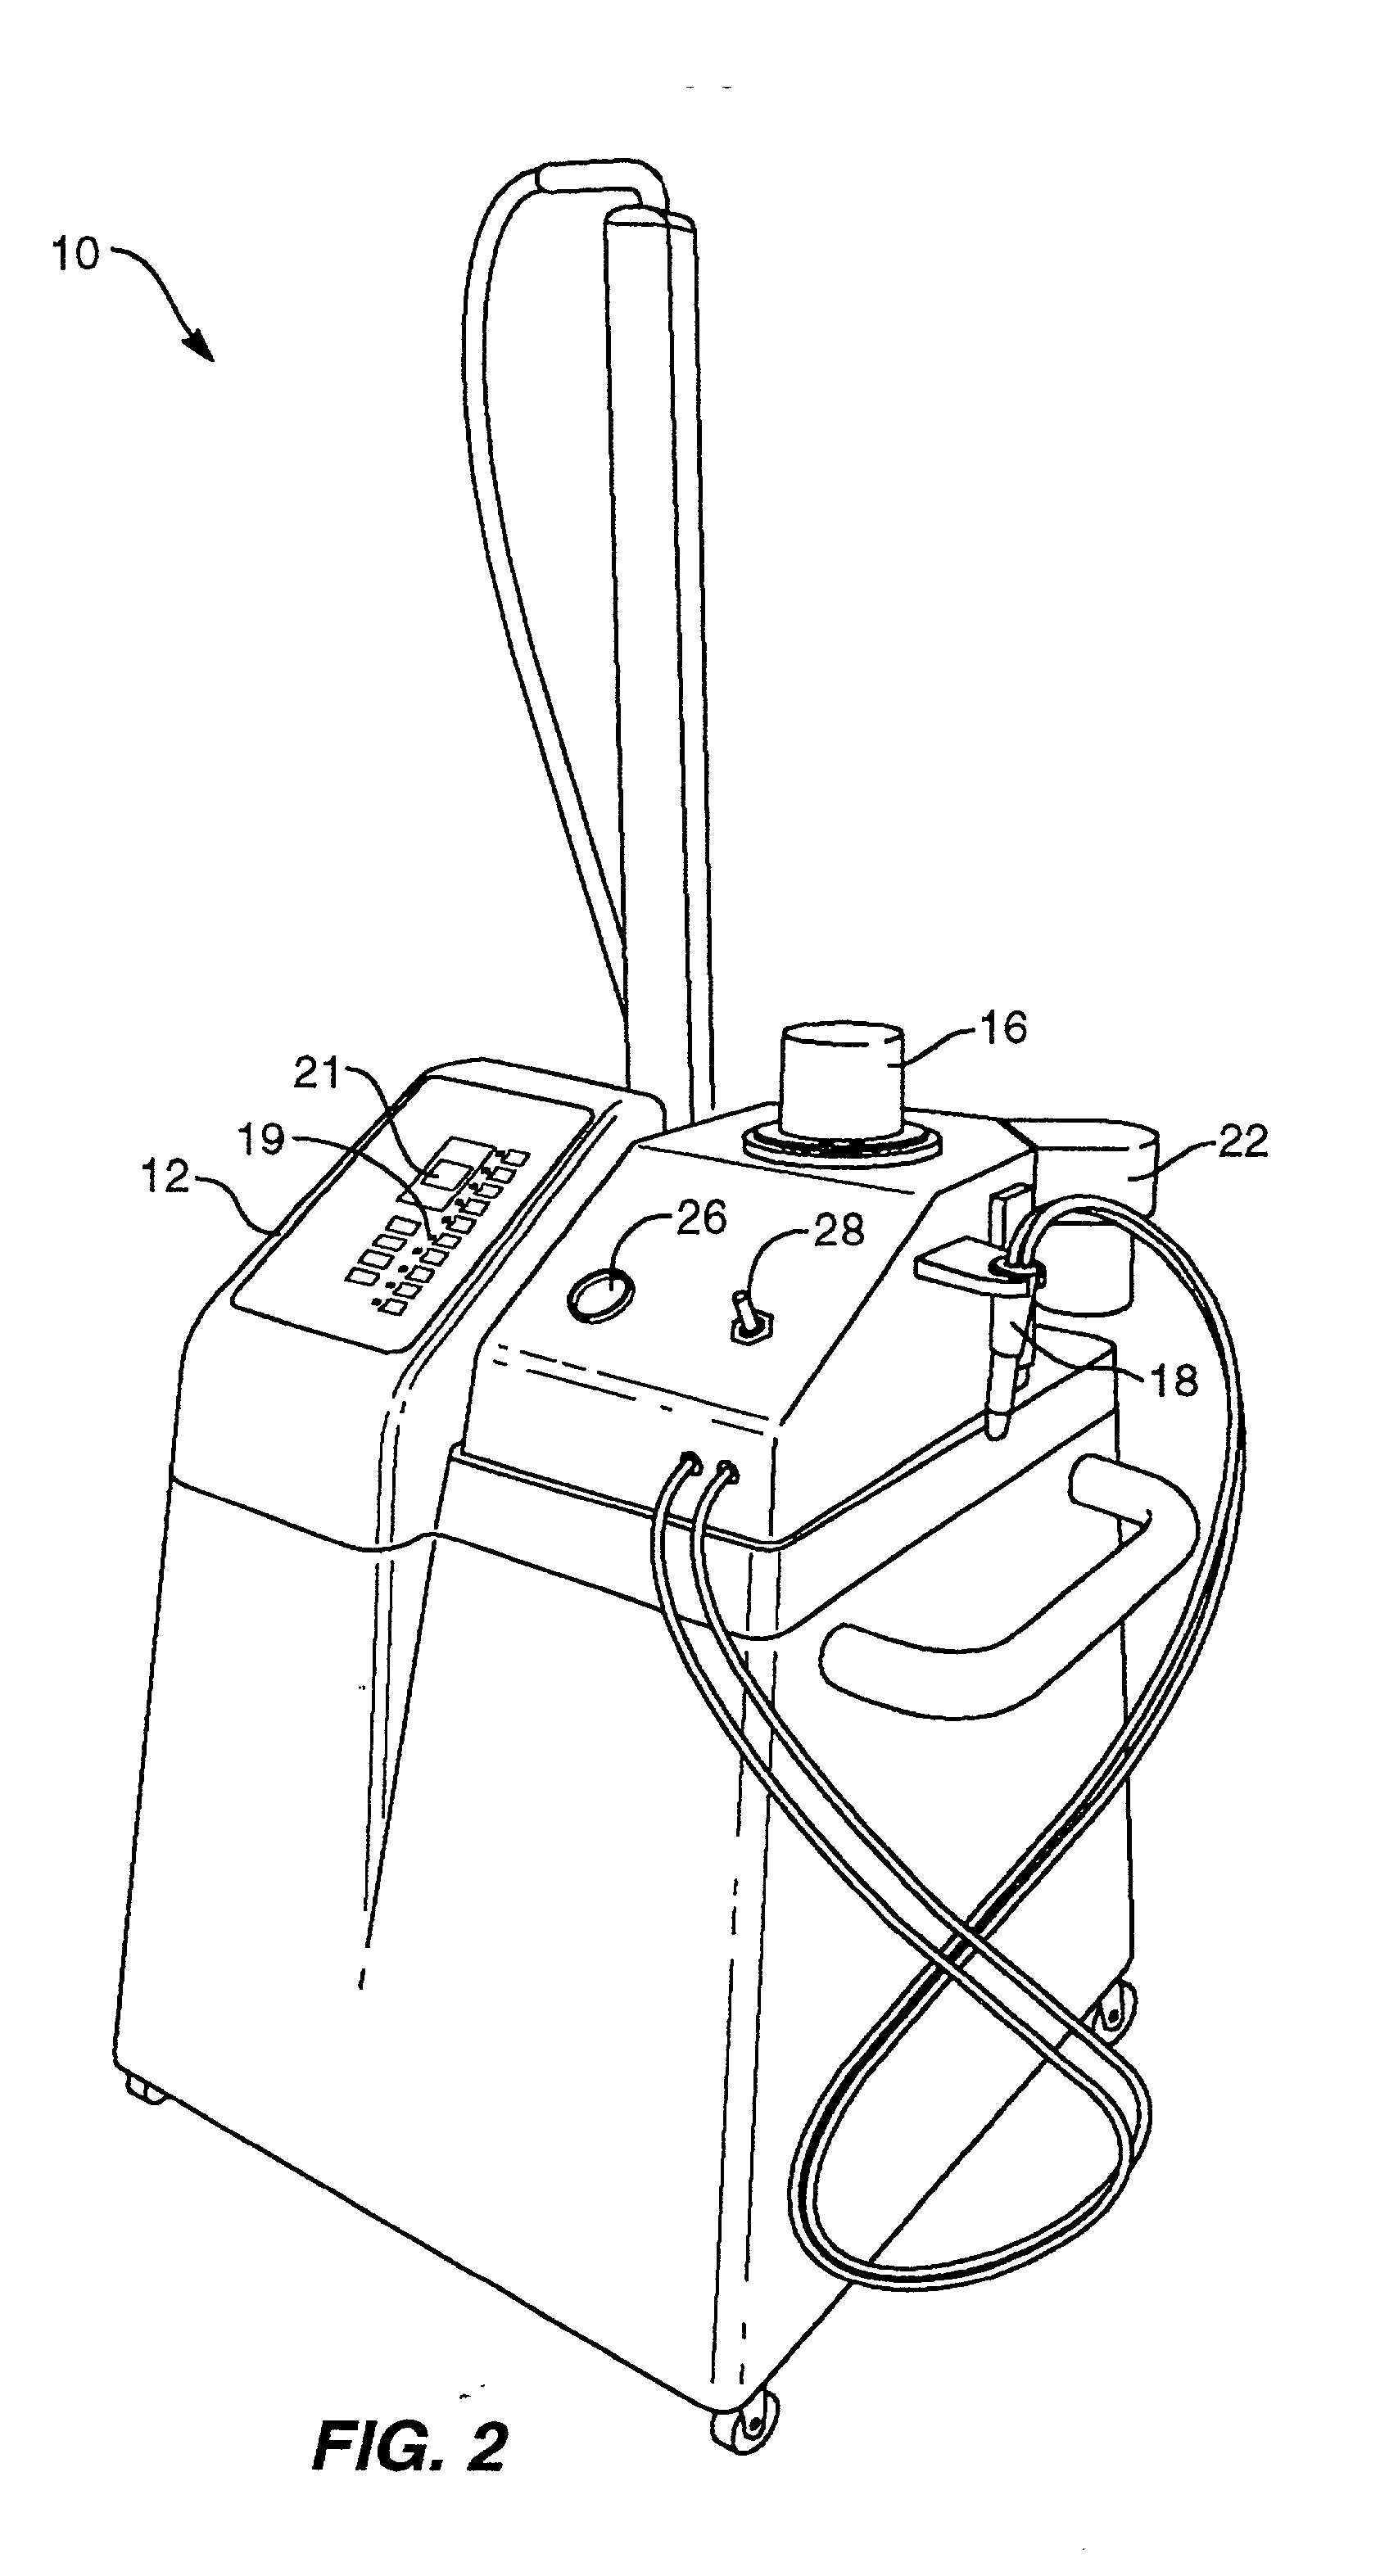 Method and system for performing microabrasion